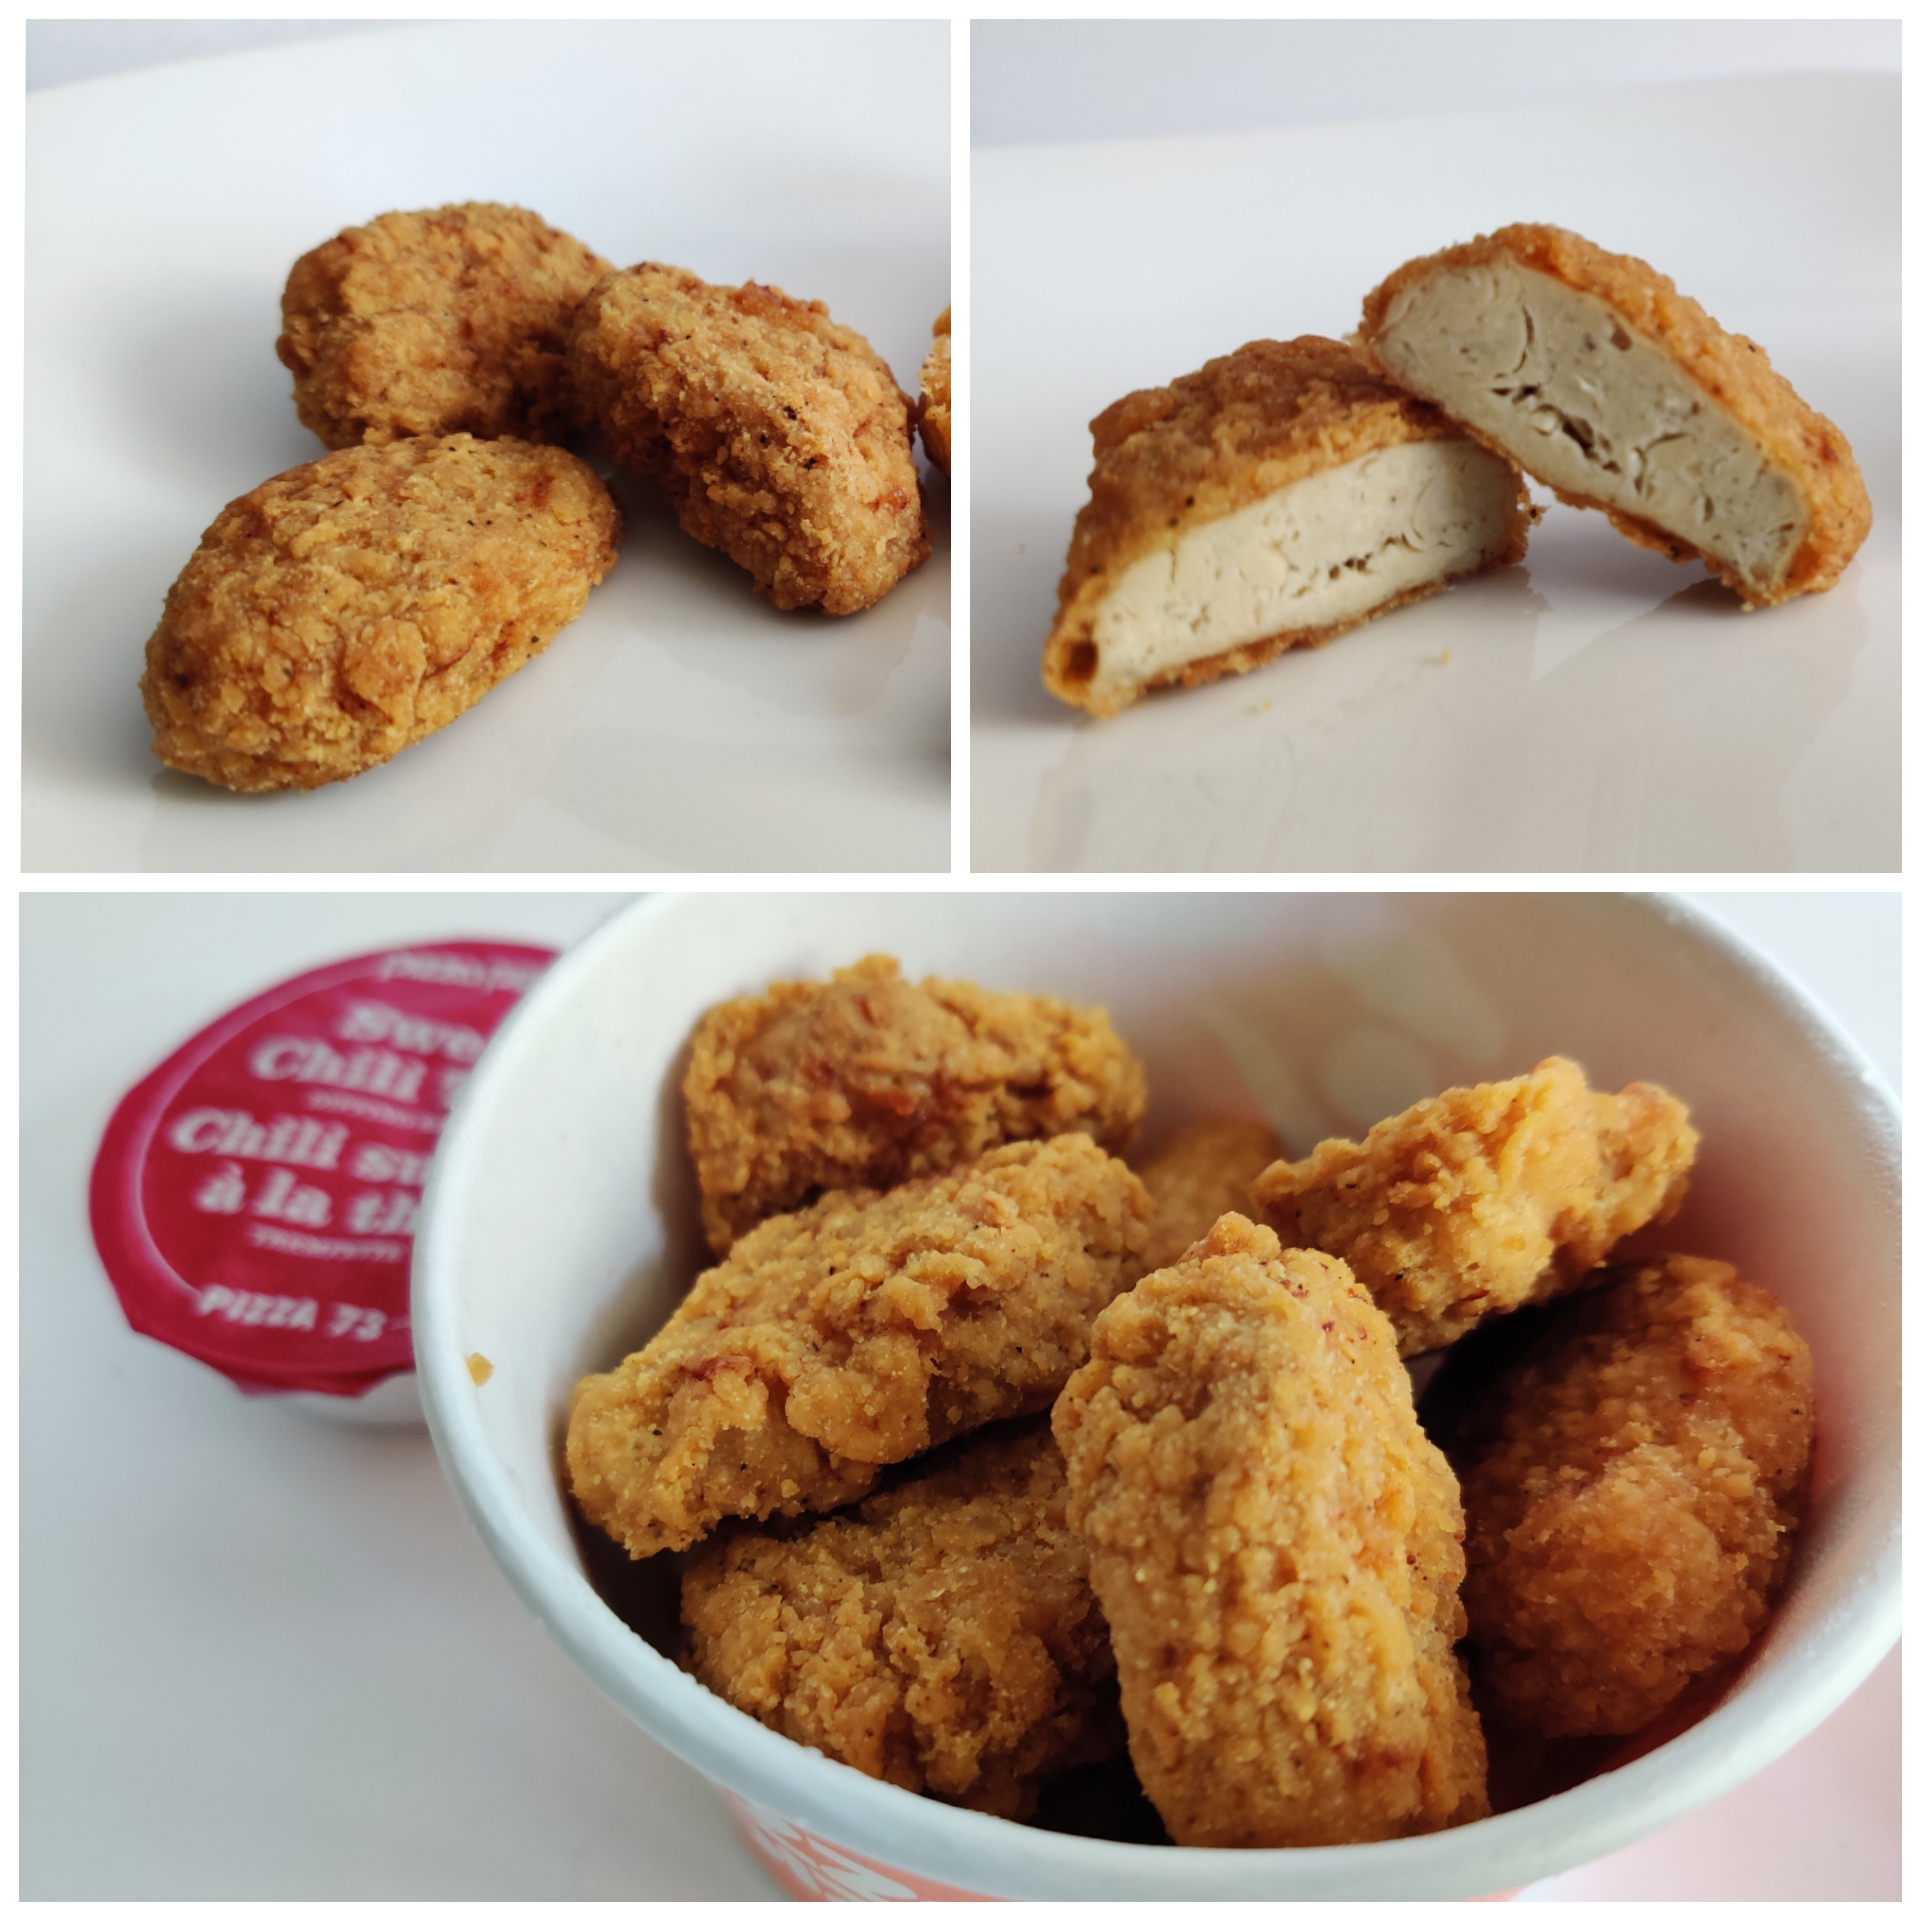 Three photos side-by-side of plant-based chicken tenders from Pizza Pizza.